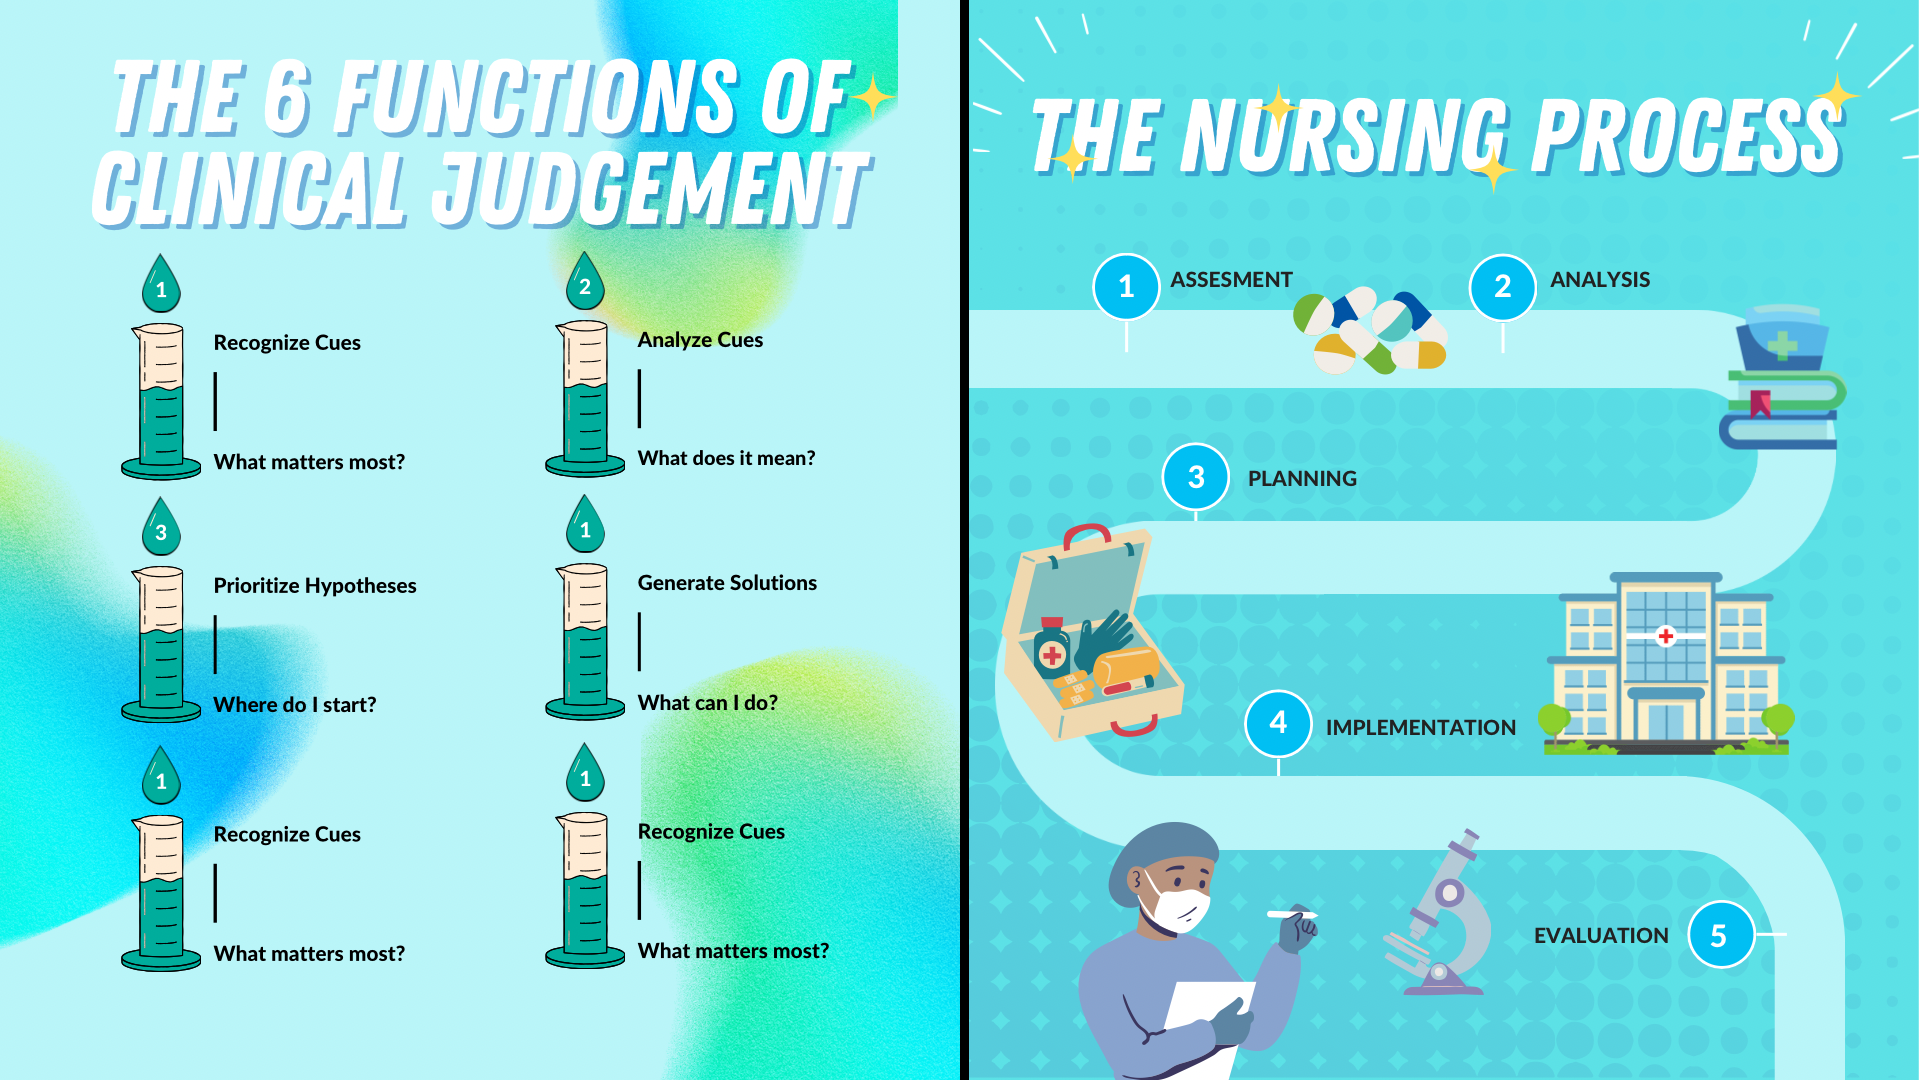 Ncsbn Clinical Judgment Measurement Model And The Nursing Process Alagarn